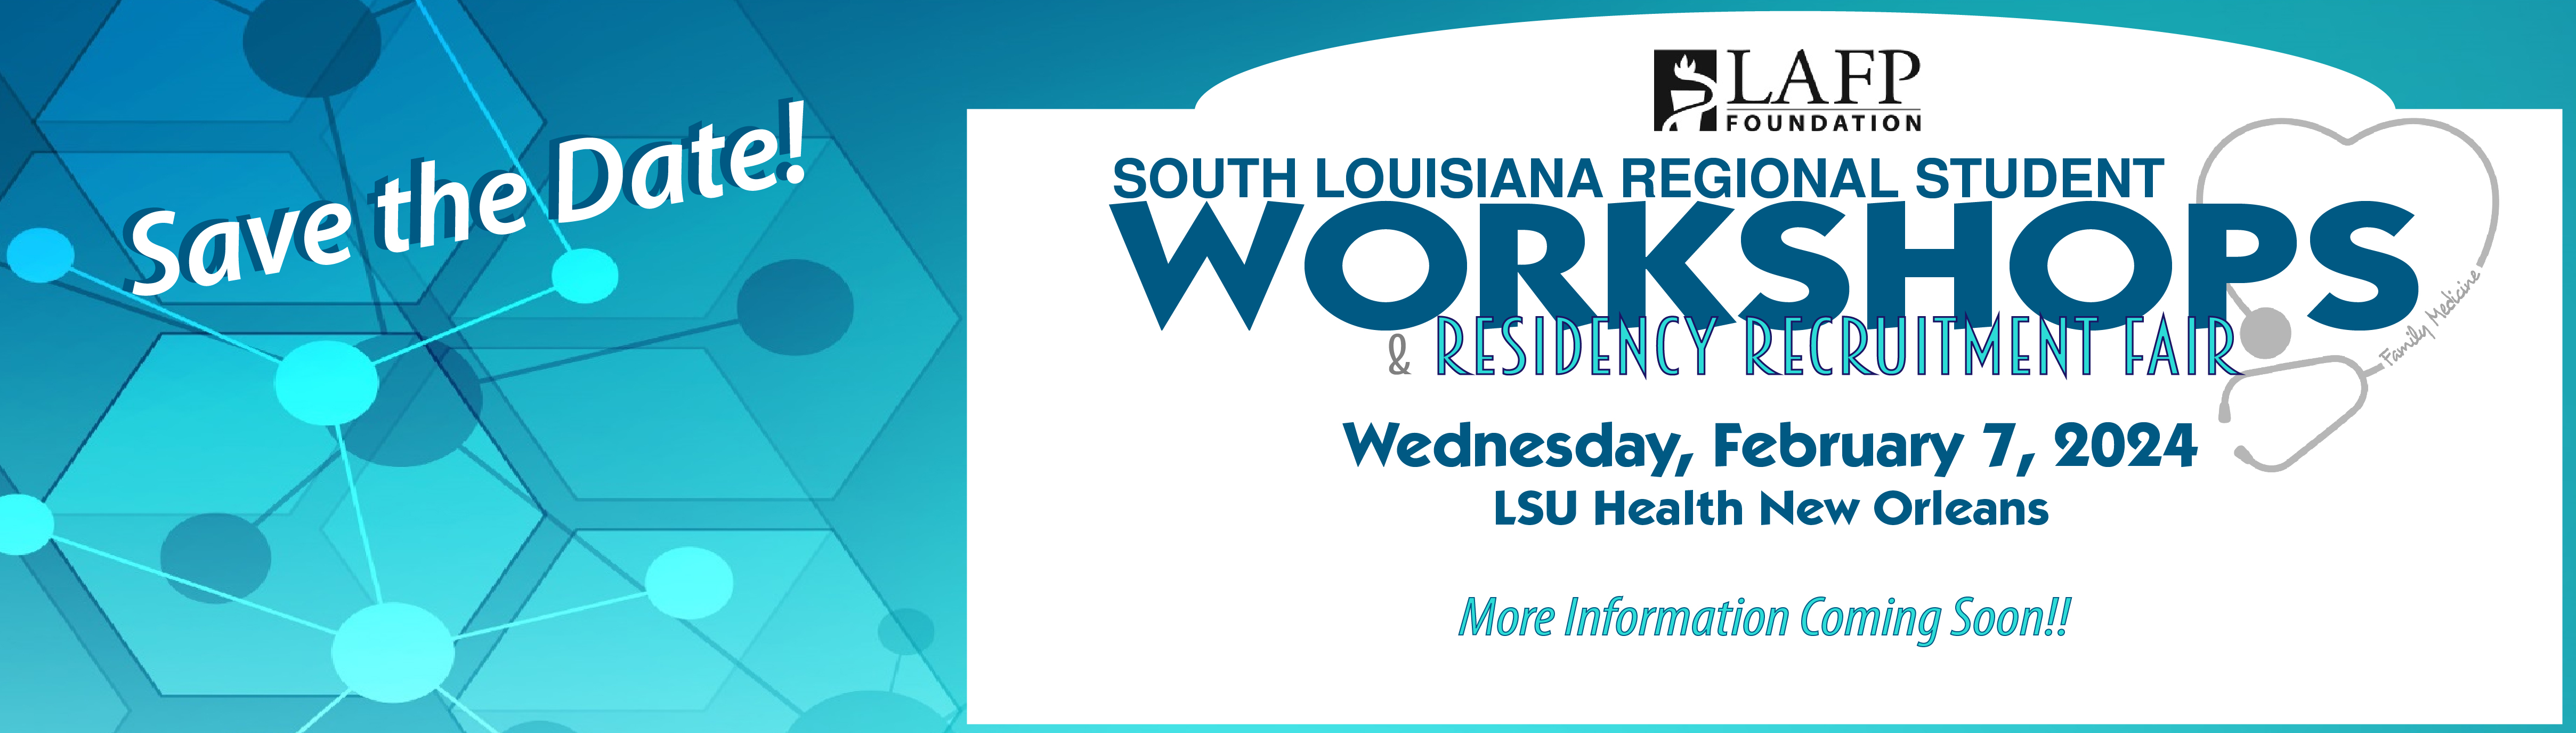 2024 Student Workshops Save the Date New Orleans Web Banner 01